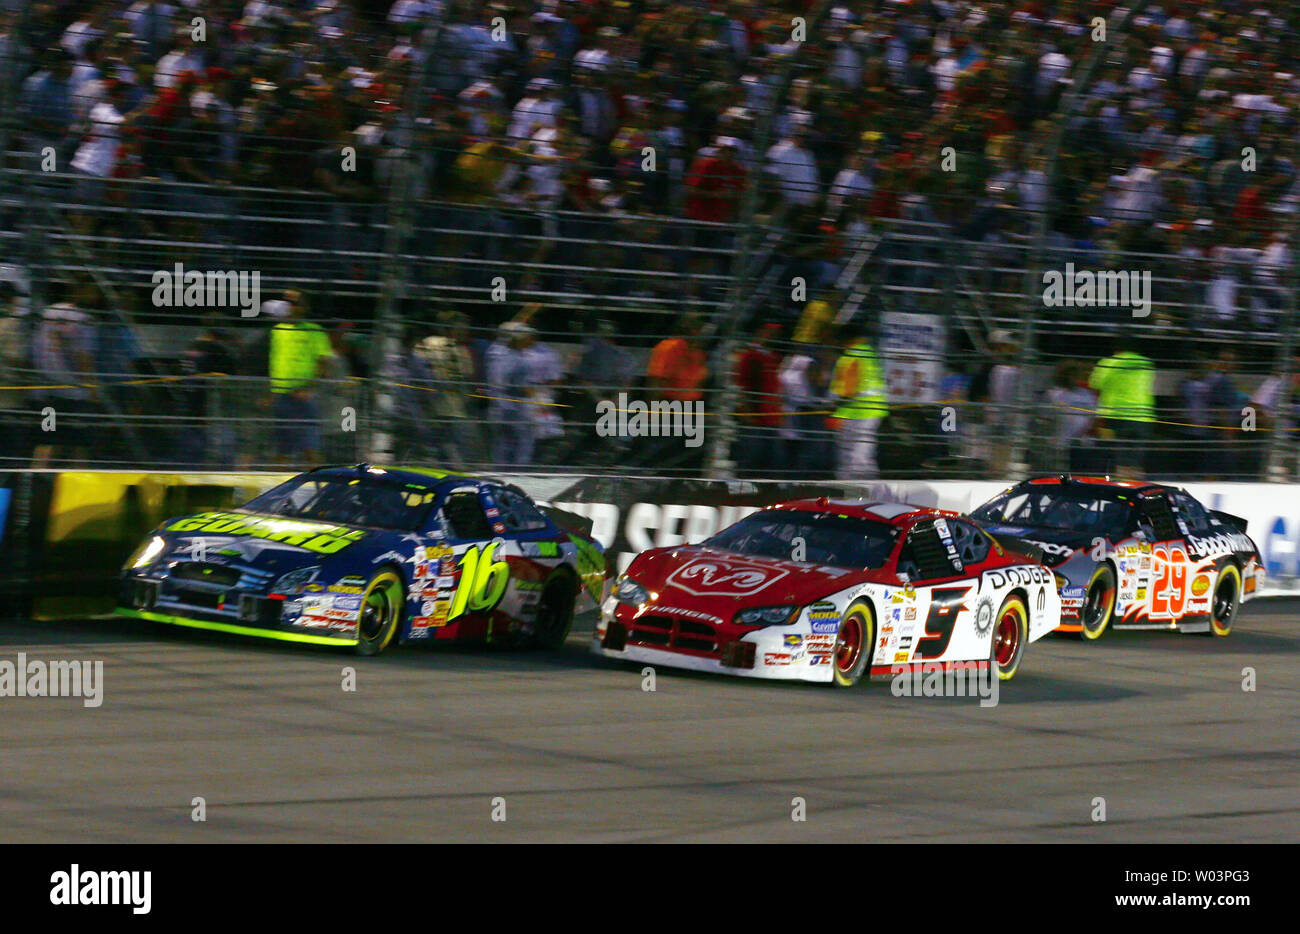 Greg Biffle, driver of the #16 National Guard Ford, leads Kasey Kahne, driver of the #9 Dodge Dealers/UAW Dodge, and Kevin Harvick, driver of the #29 GM Goodwrench Chevrolet during the Crown Royal 400, at the Richmond International Raceway in Richmond, VA on May 6, 2006. (UPI Photo/Christopher Rossi) Stock Photo